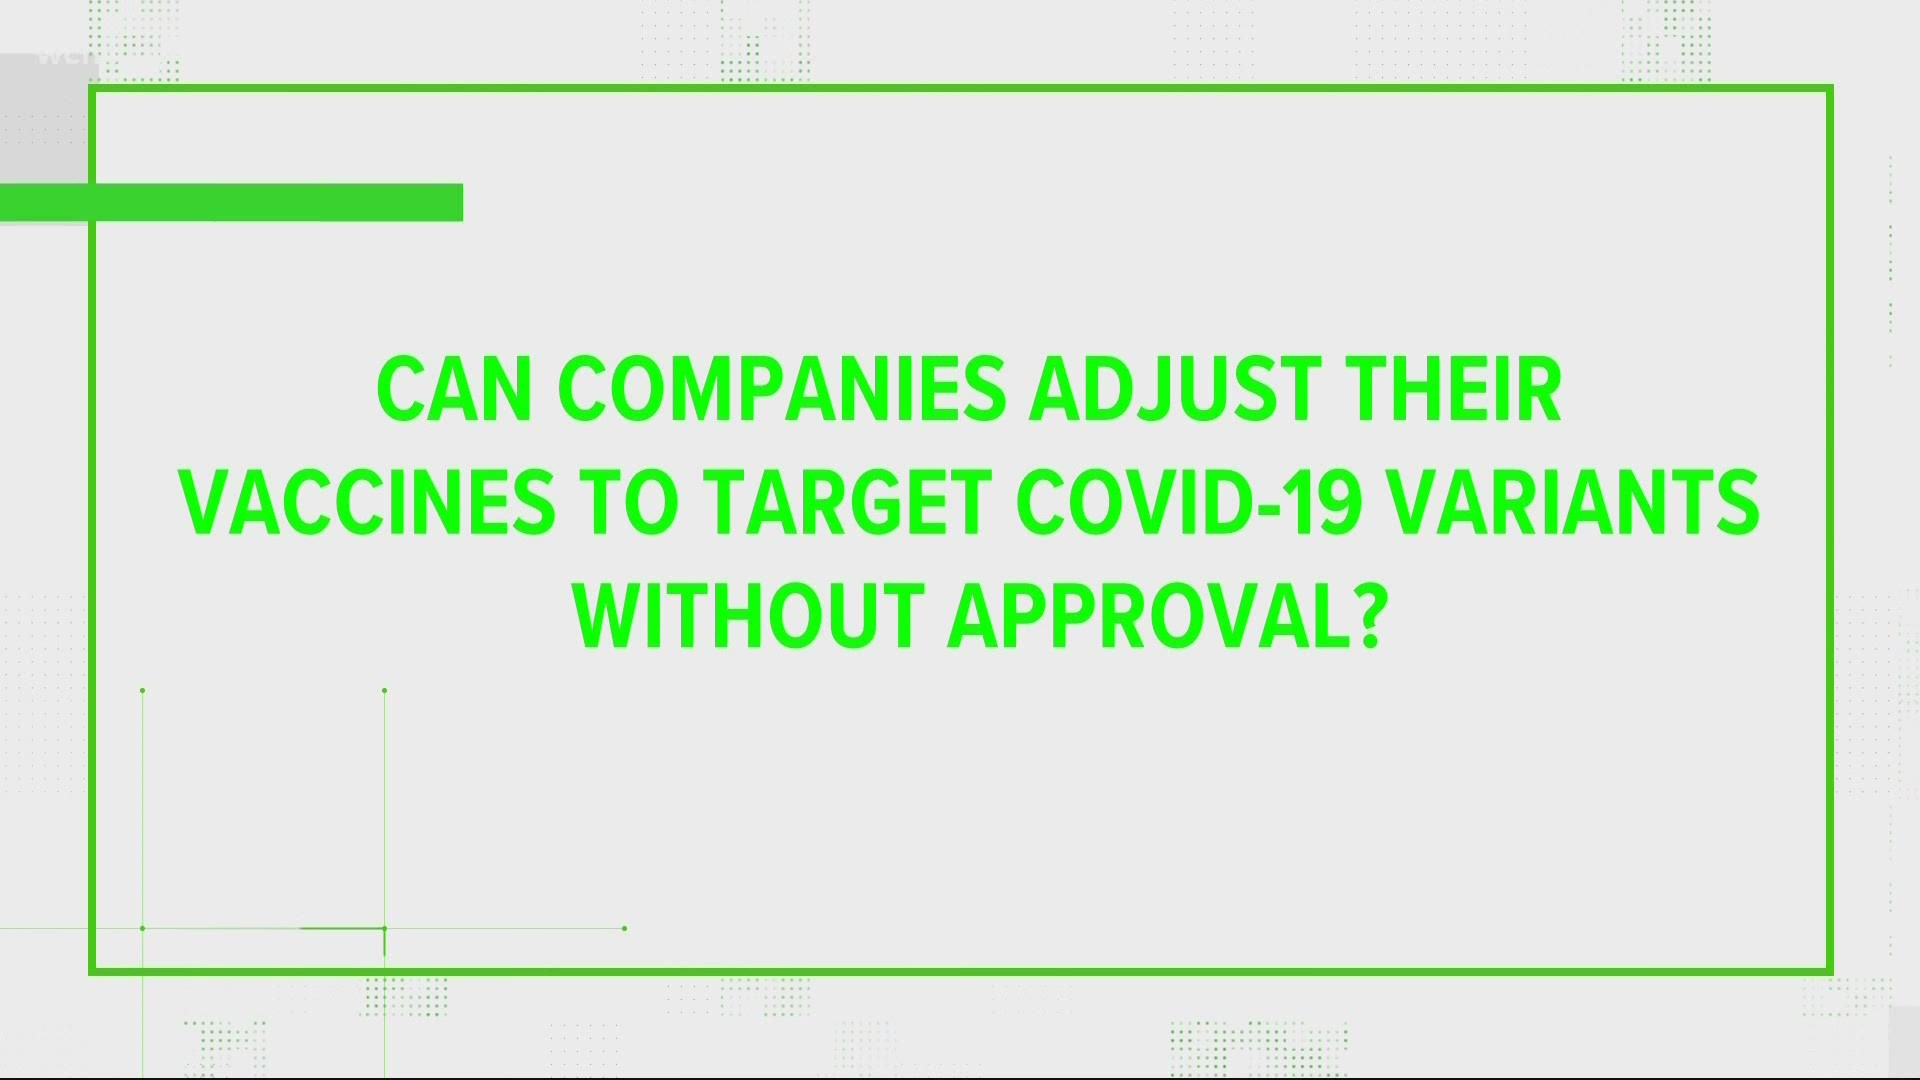 The COVID-19 vaccines might need to be updated to better target coronavirus variants. Here's how that approval process would work for a new shot.